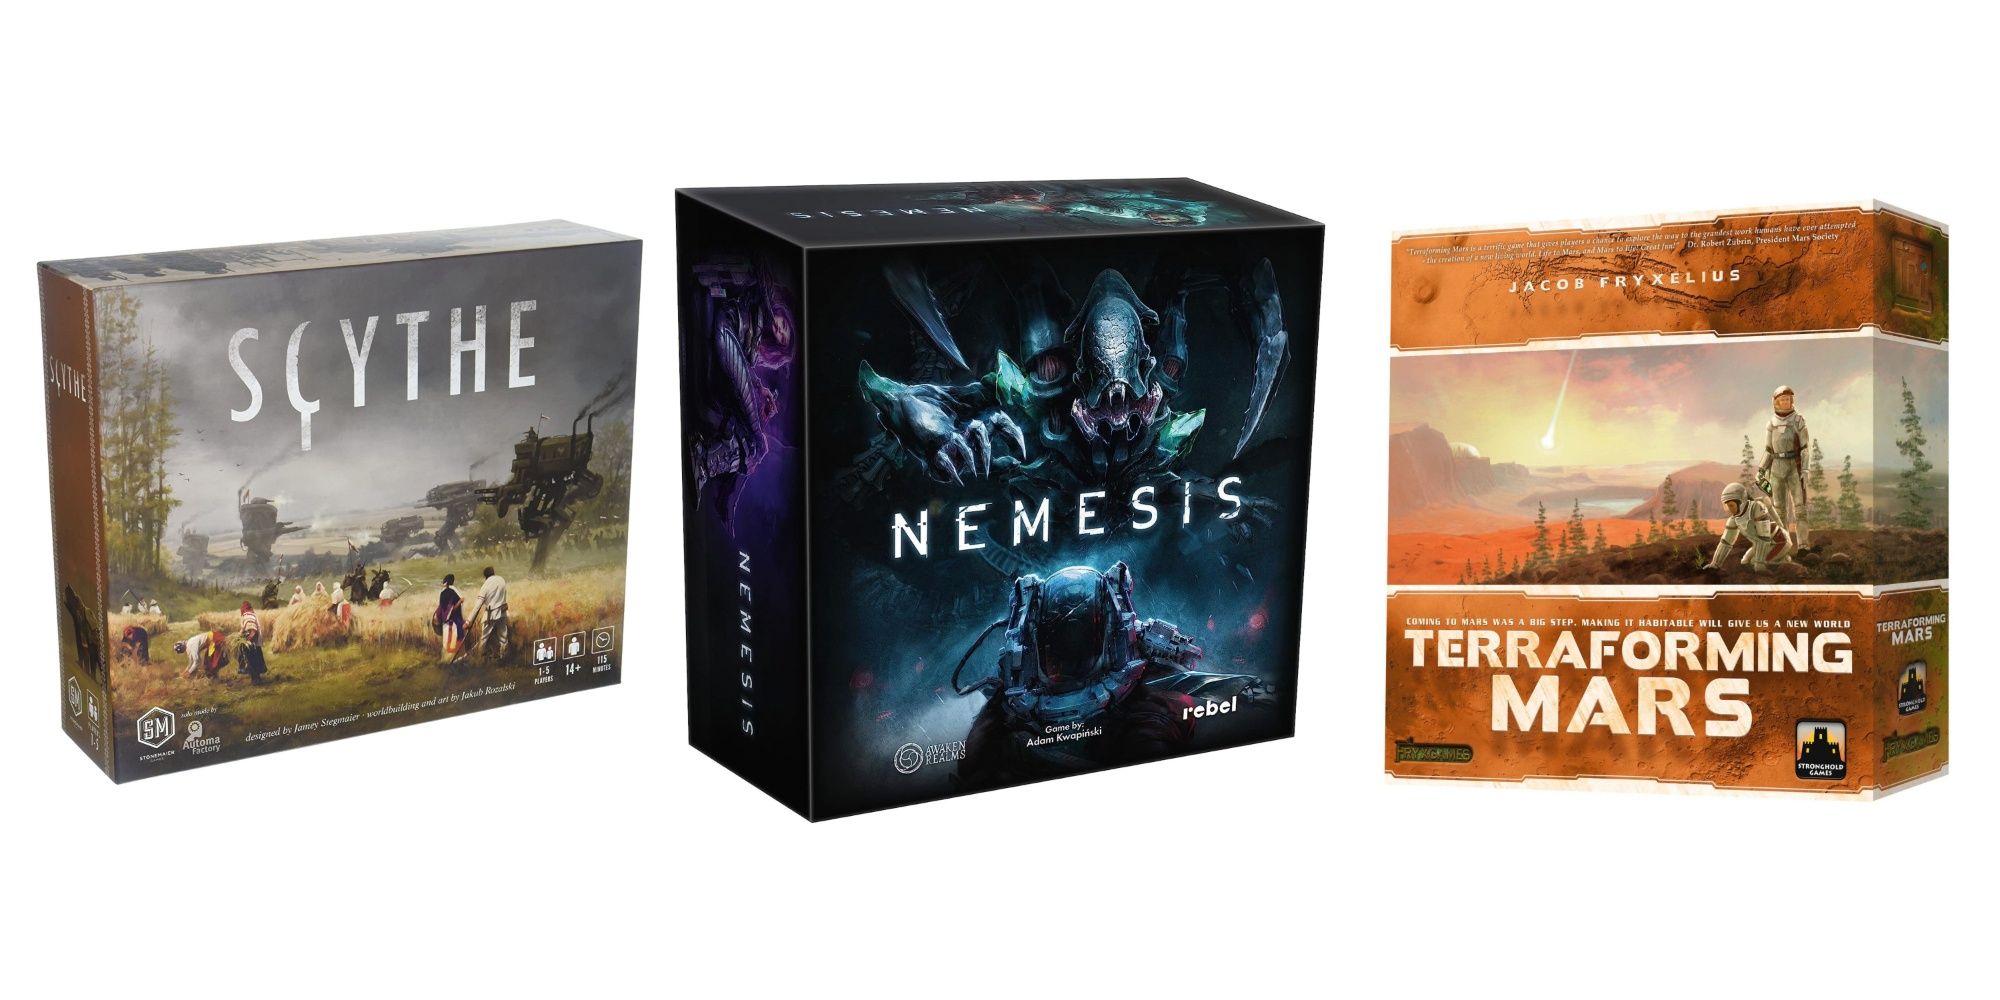 15 Best Single Player Card Games To Play Solo And Challenge Yourself